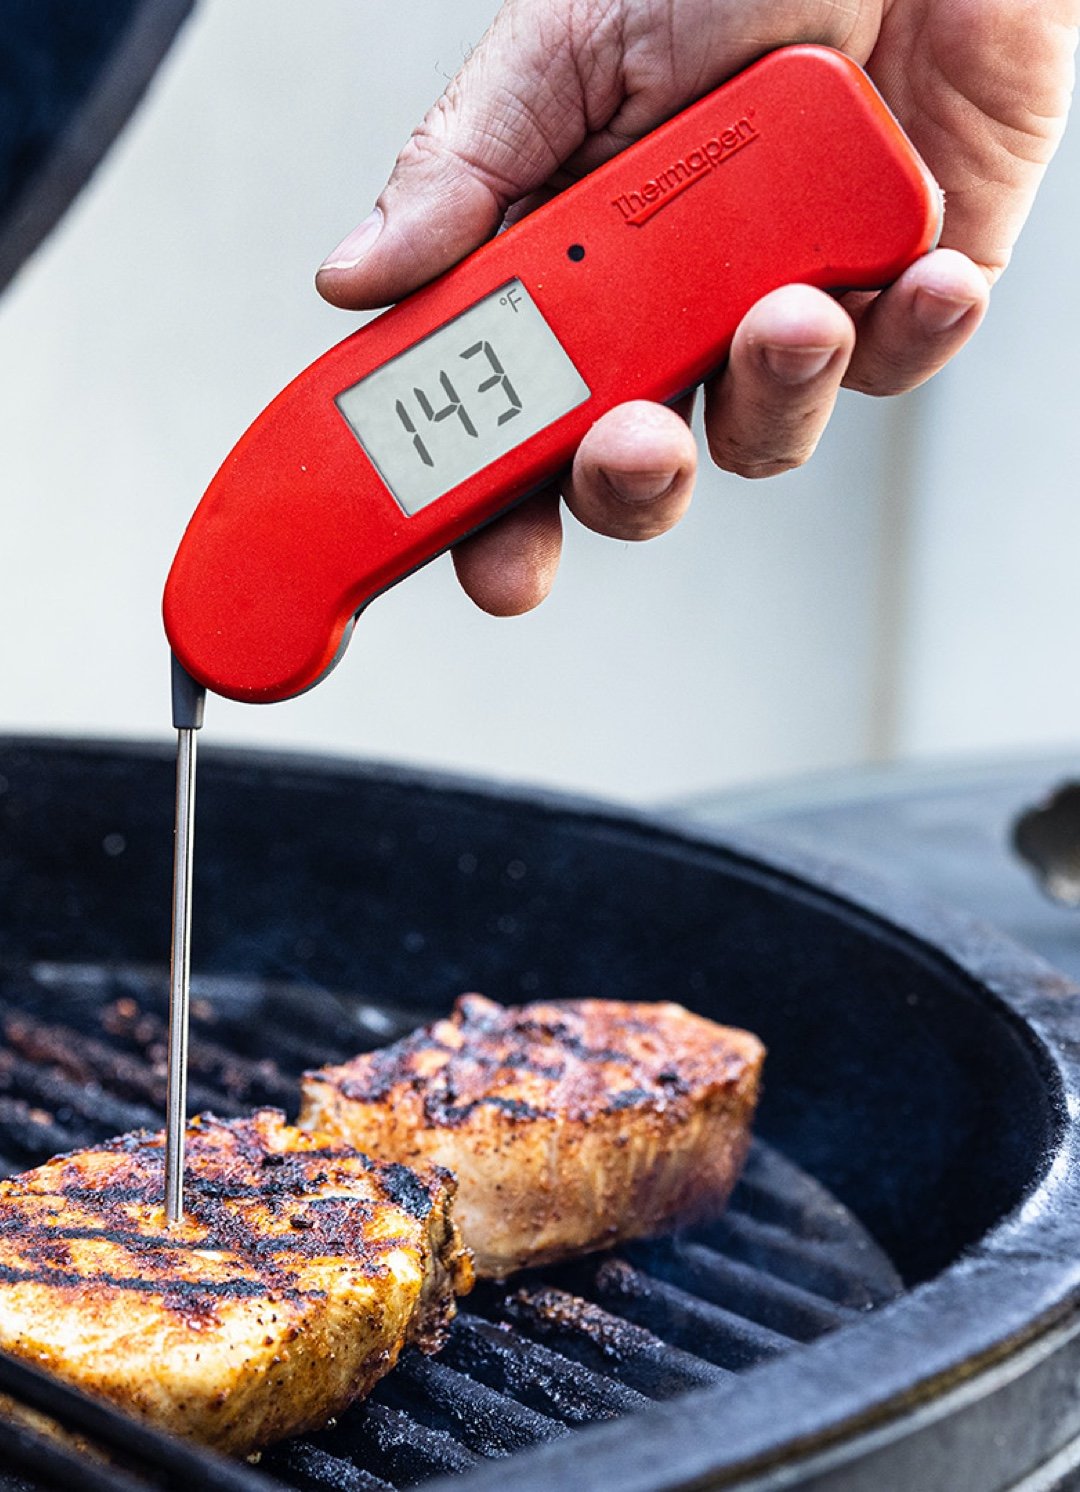 Limited Edition Thermapen ONE